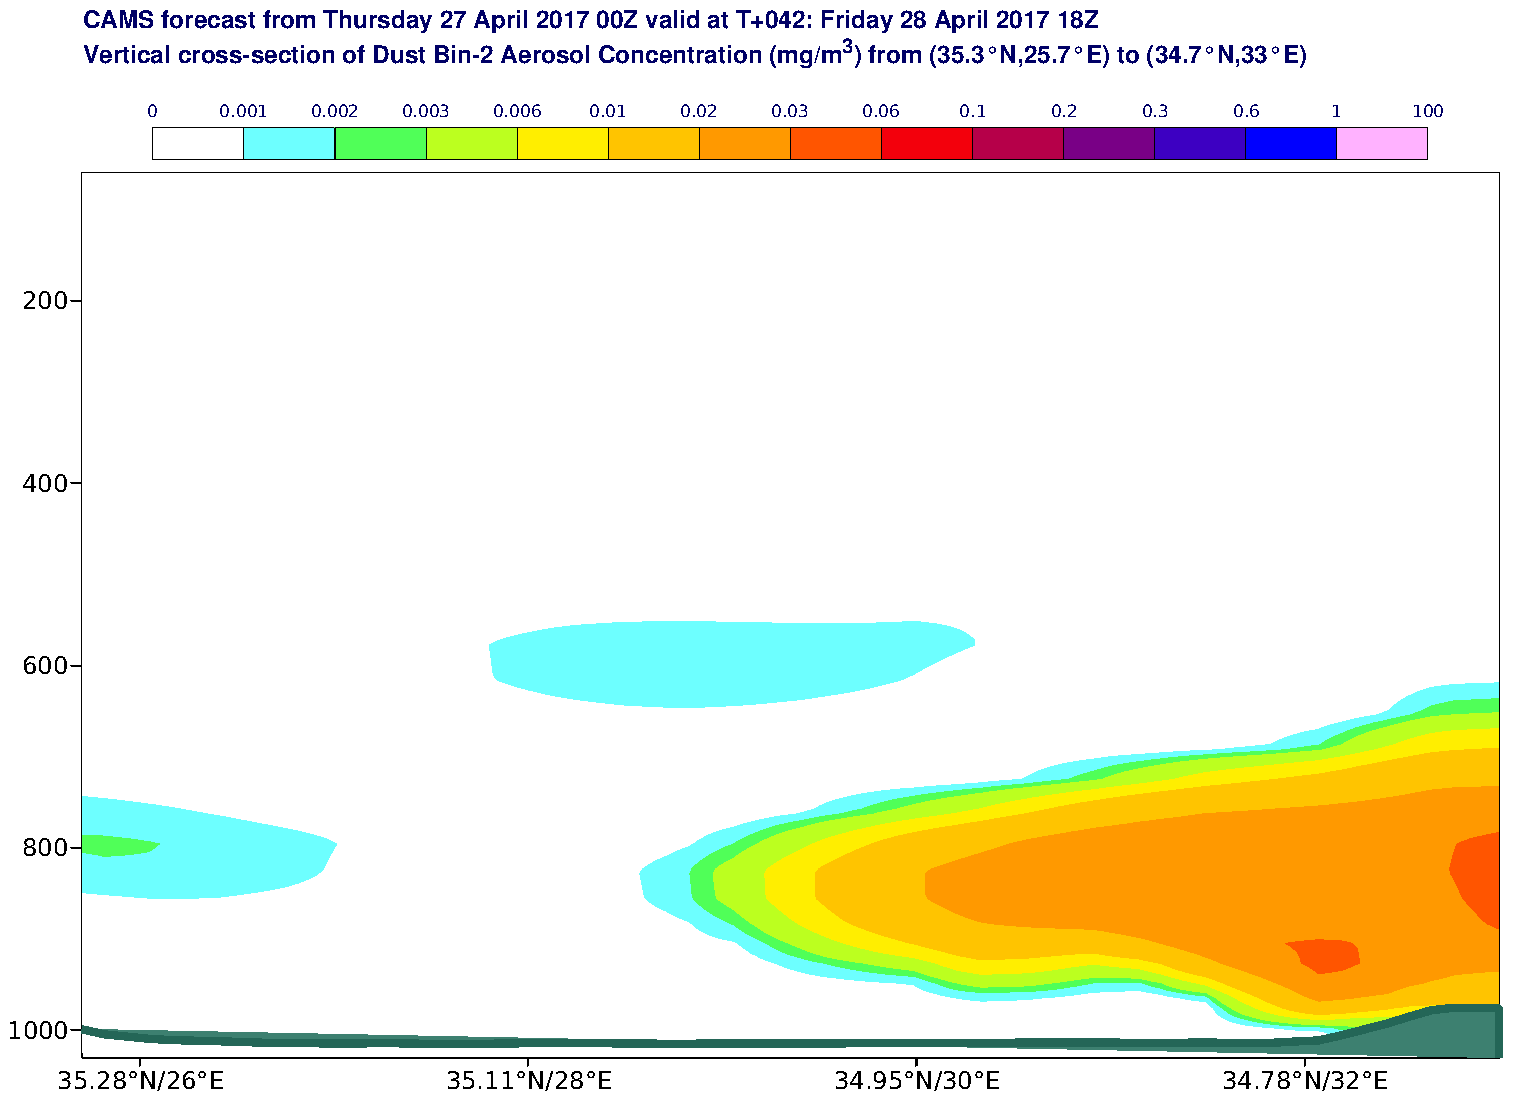 Vertical cross-section of Dust Bin-2 Aerosol Concentration (mg/m3) valid at T42 - 2017-04-28 18:00